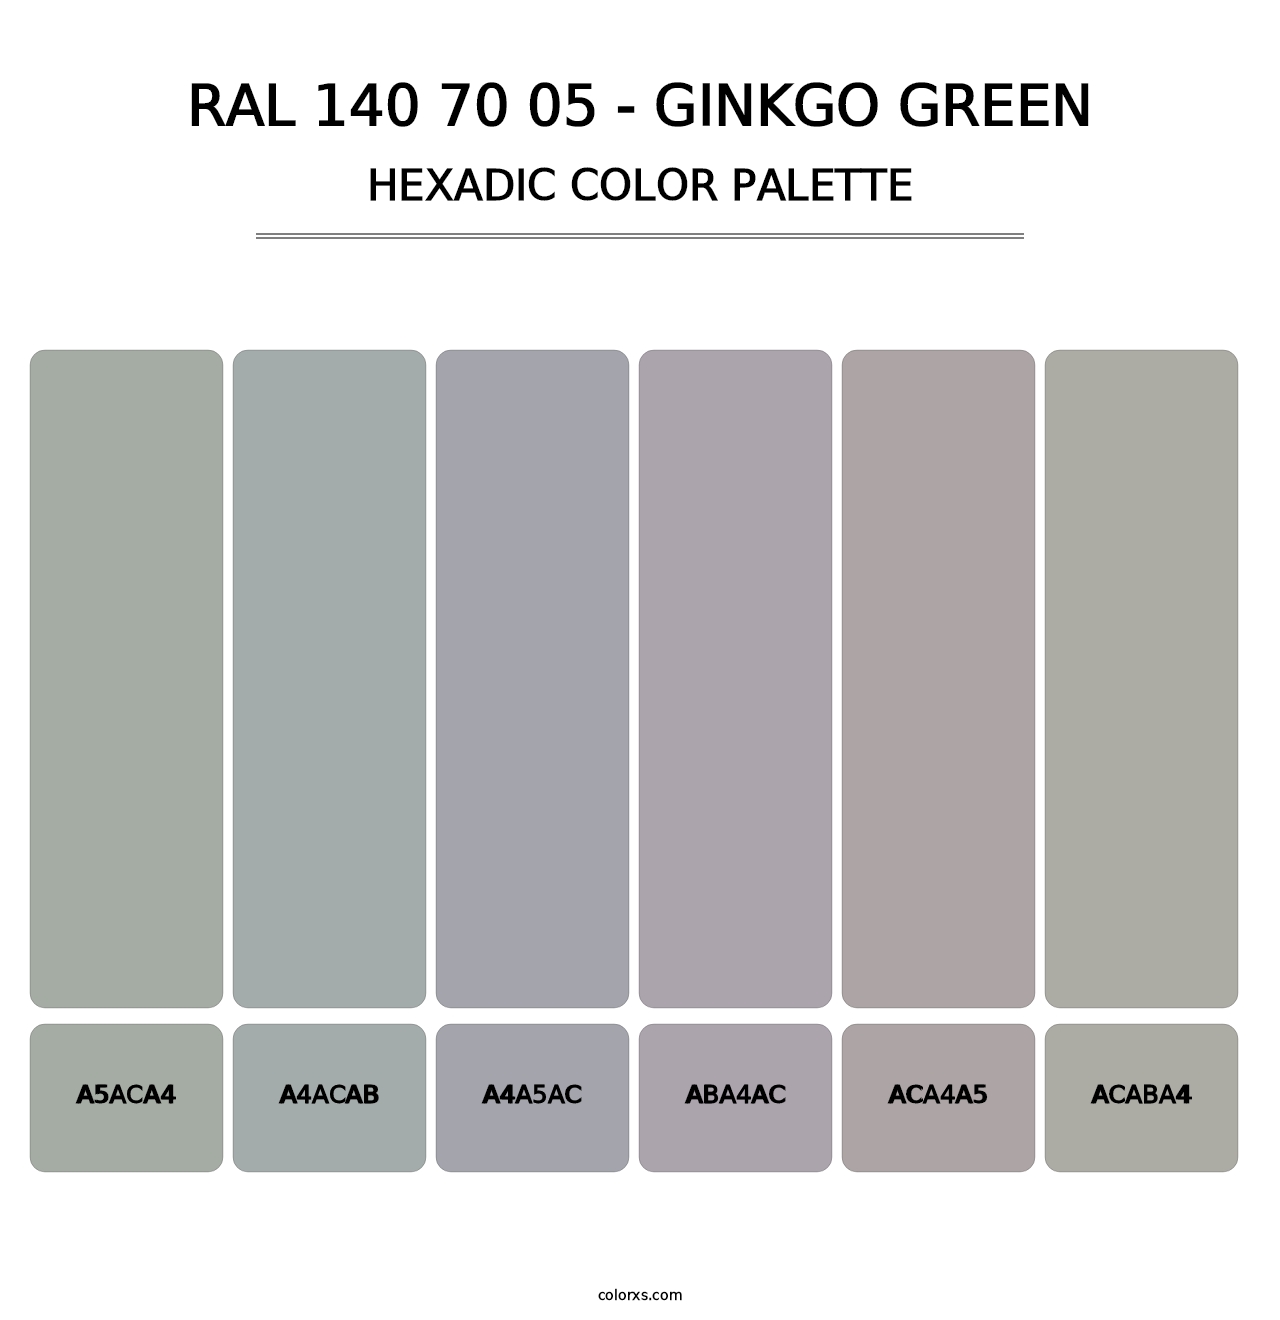 RAL 140 70 05 - Ginkgo Green - Hexadic Color Palette